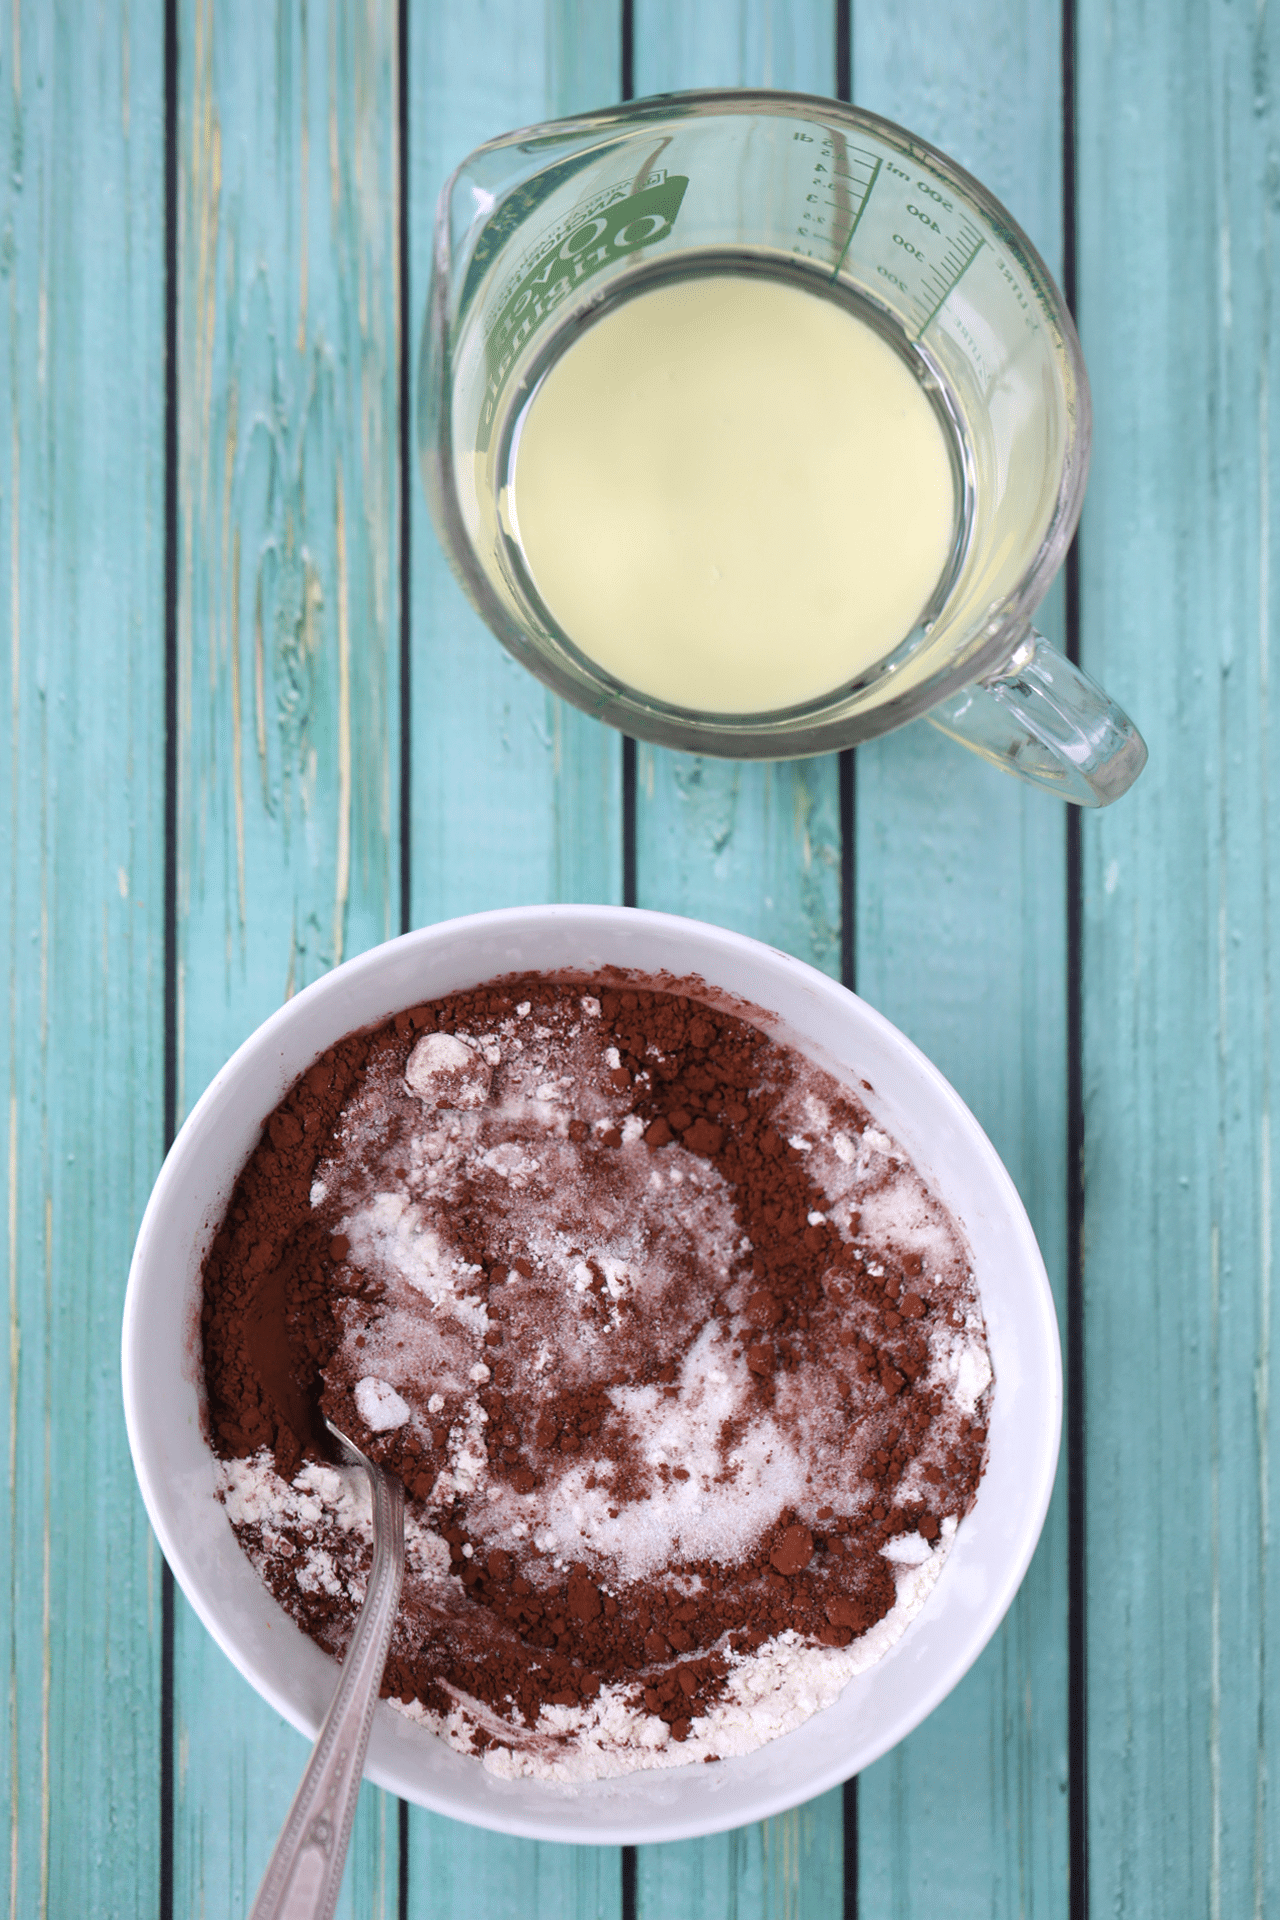 Ingredients for 2-Minute Microwave Brownie Bowl are separately prepared. Dry ingredients in a bowl including cocoa powder, all-purpose flour, sugar, and slat. Wet ingredients in a liquid measuring jug including milk, oil, and vanilla extract. 